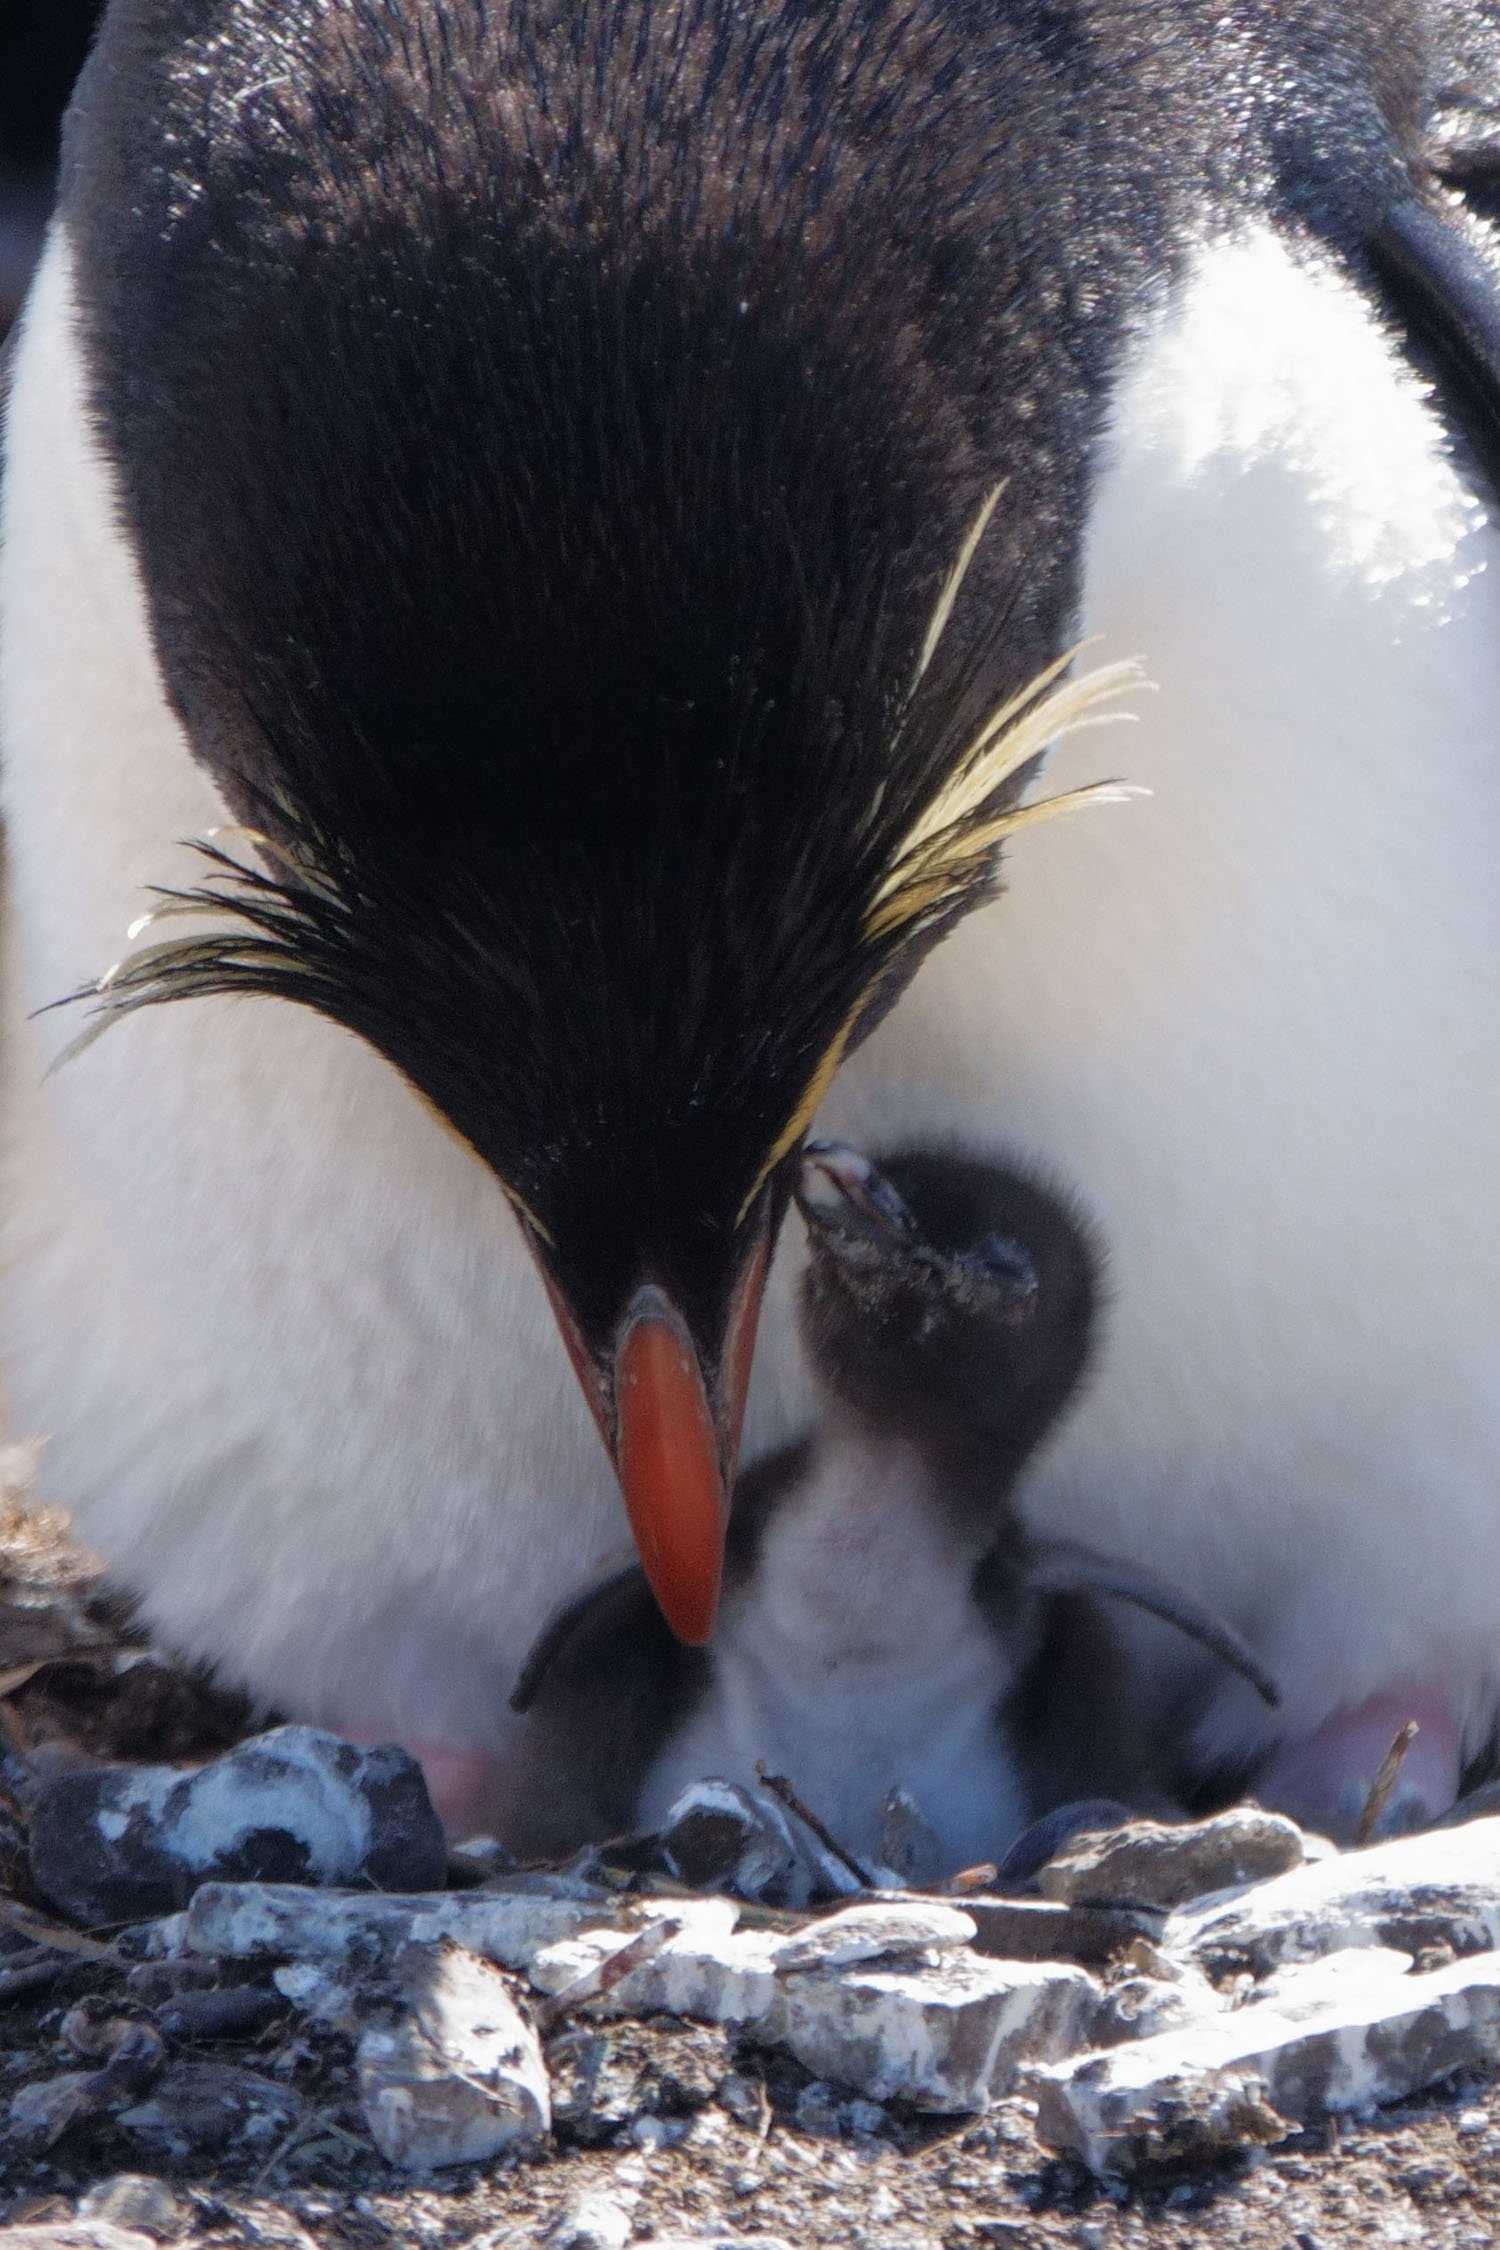 penguin and chick